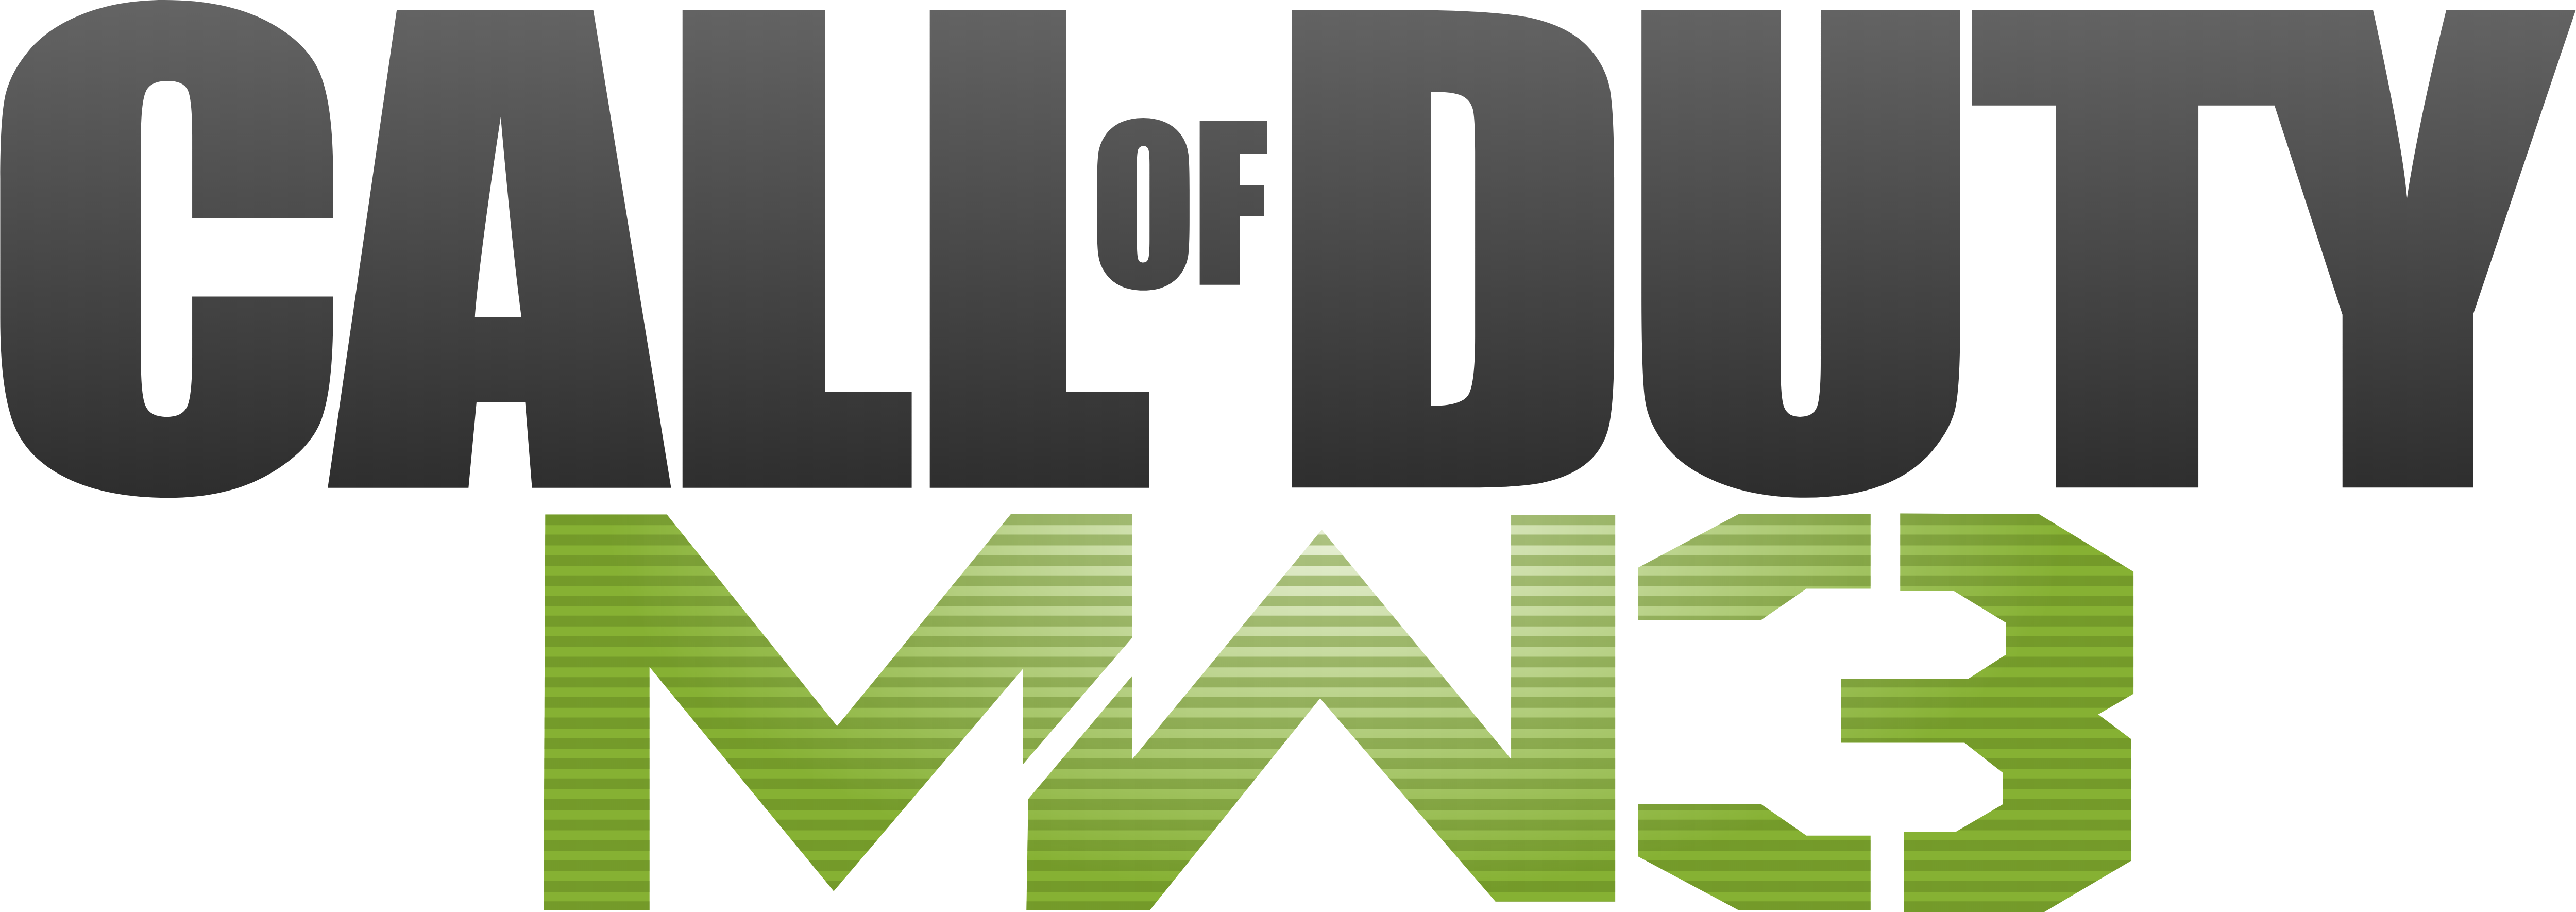 Call Of Duty – Logos Download - Call Of Duty, Transparent background PNG HD thumbnail